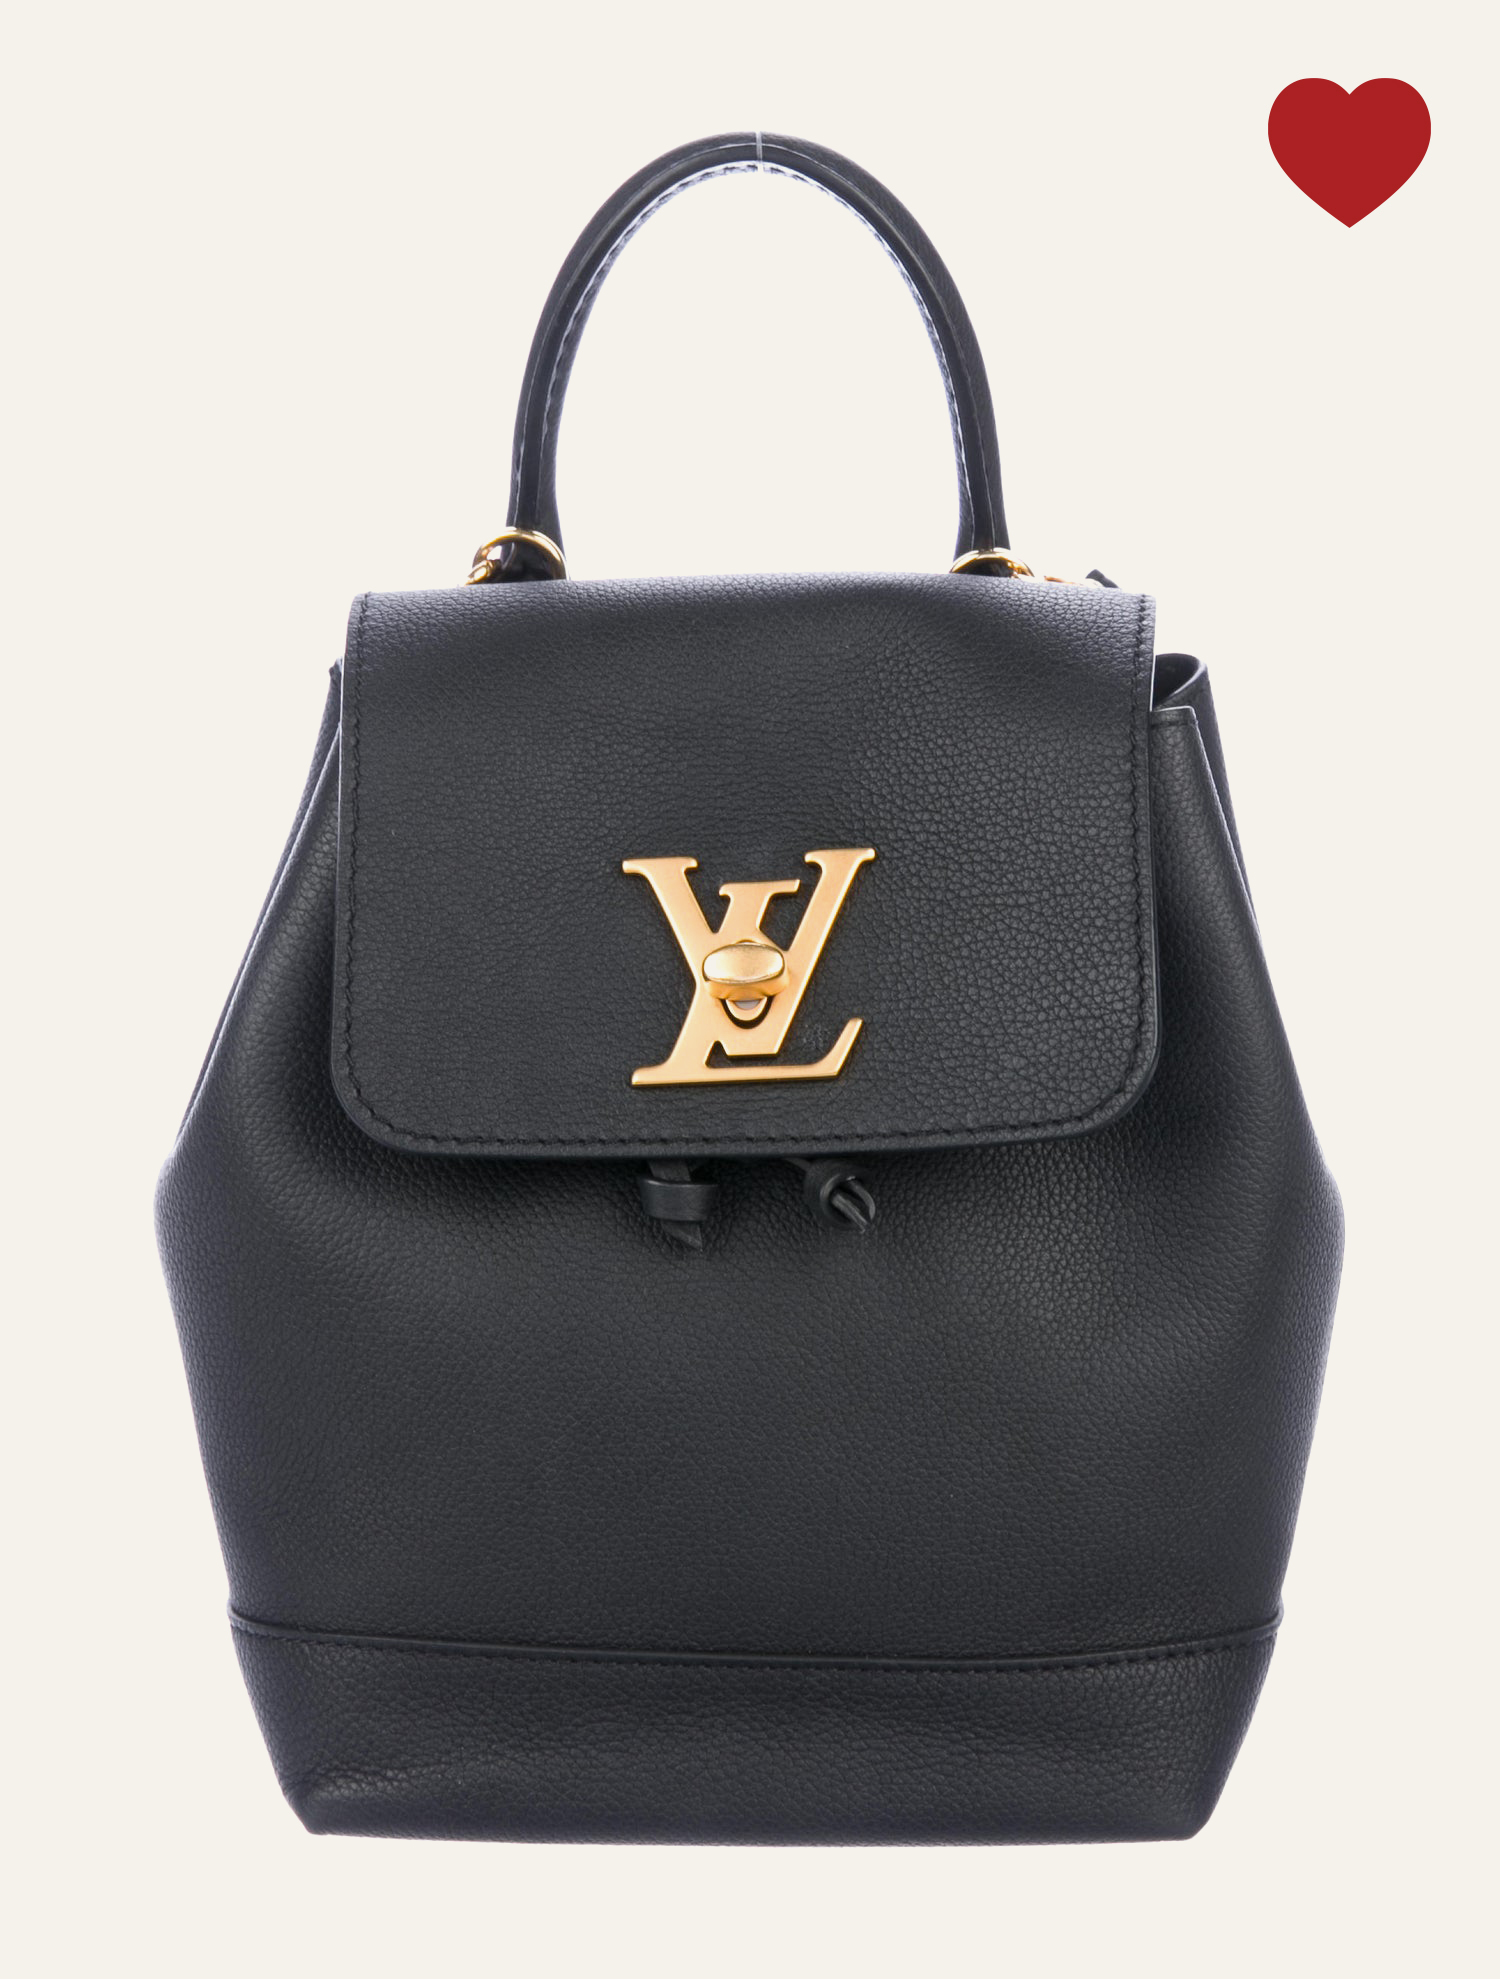 Resale Report Products-LV2 (1)